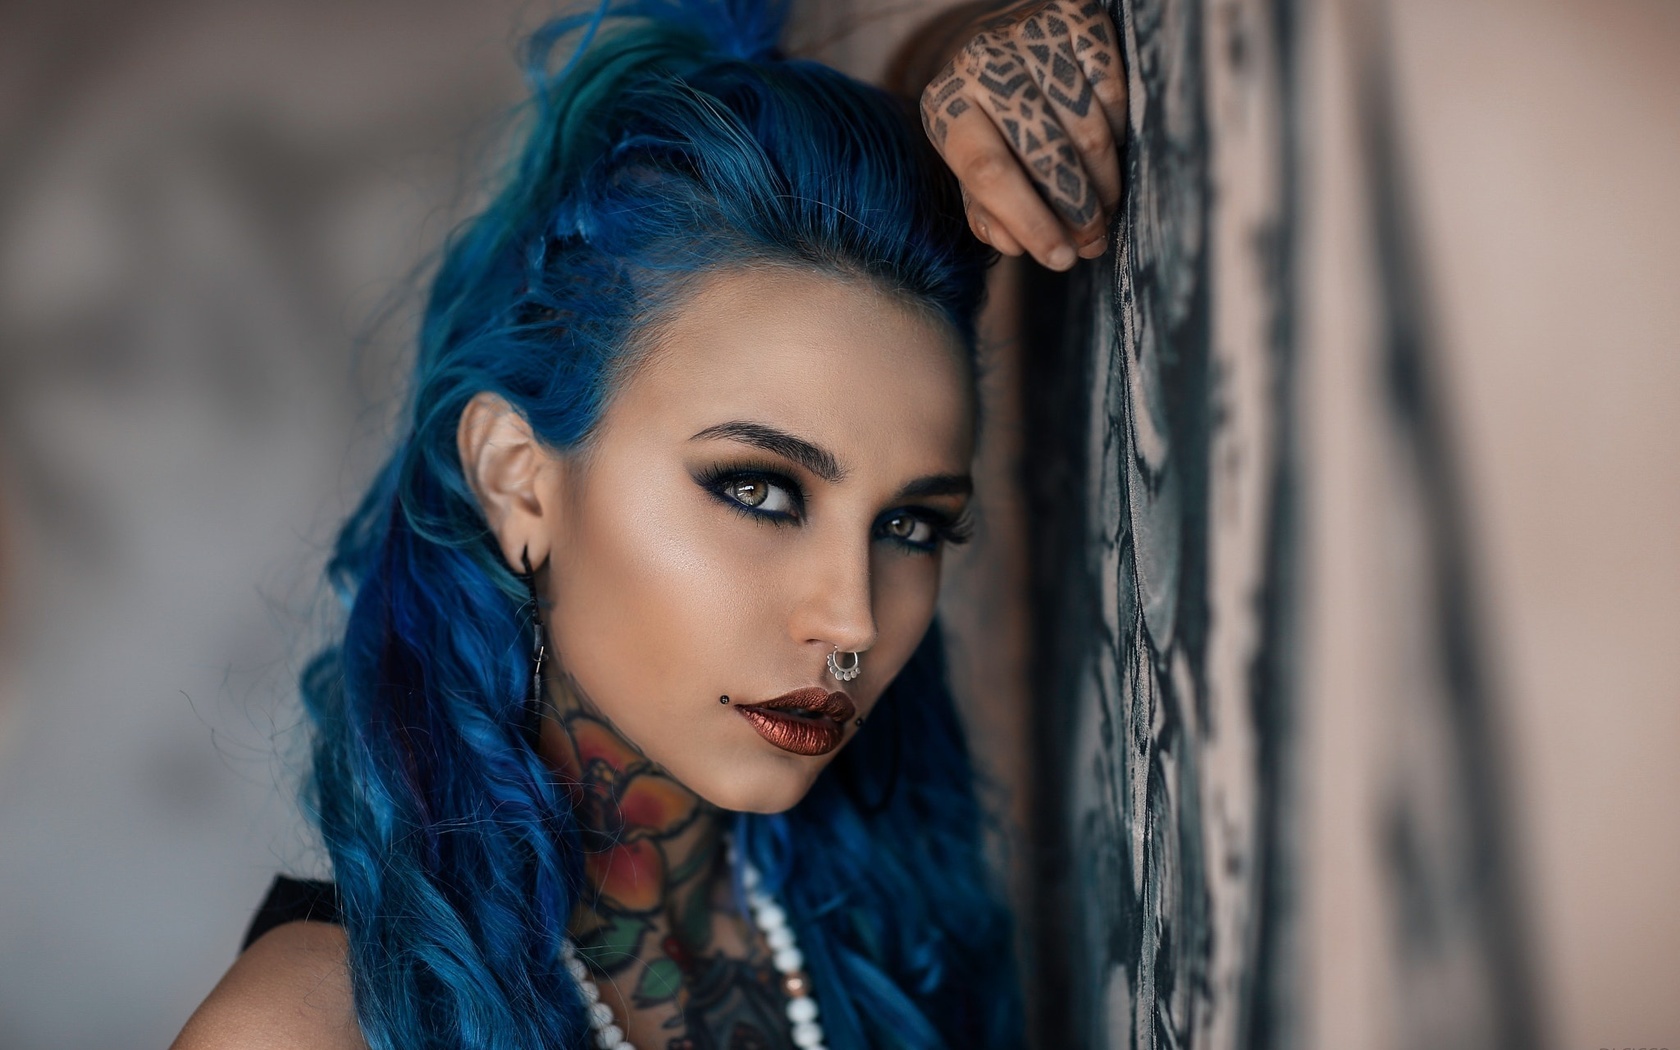 fishball suicide, felisja piana, women, tattoo, nose rings, dyed hair, blue hair, depth of field, face, portrait, alessandro di cicco, piercing, , ,   ,  ,  , , , , 